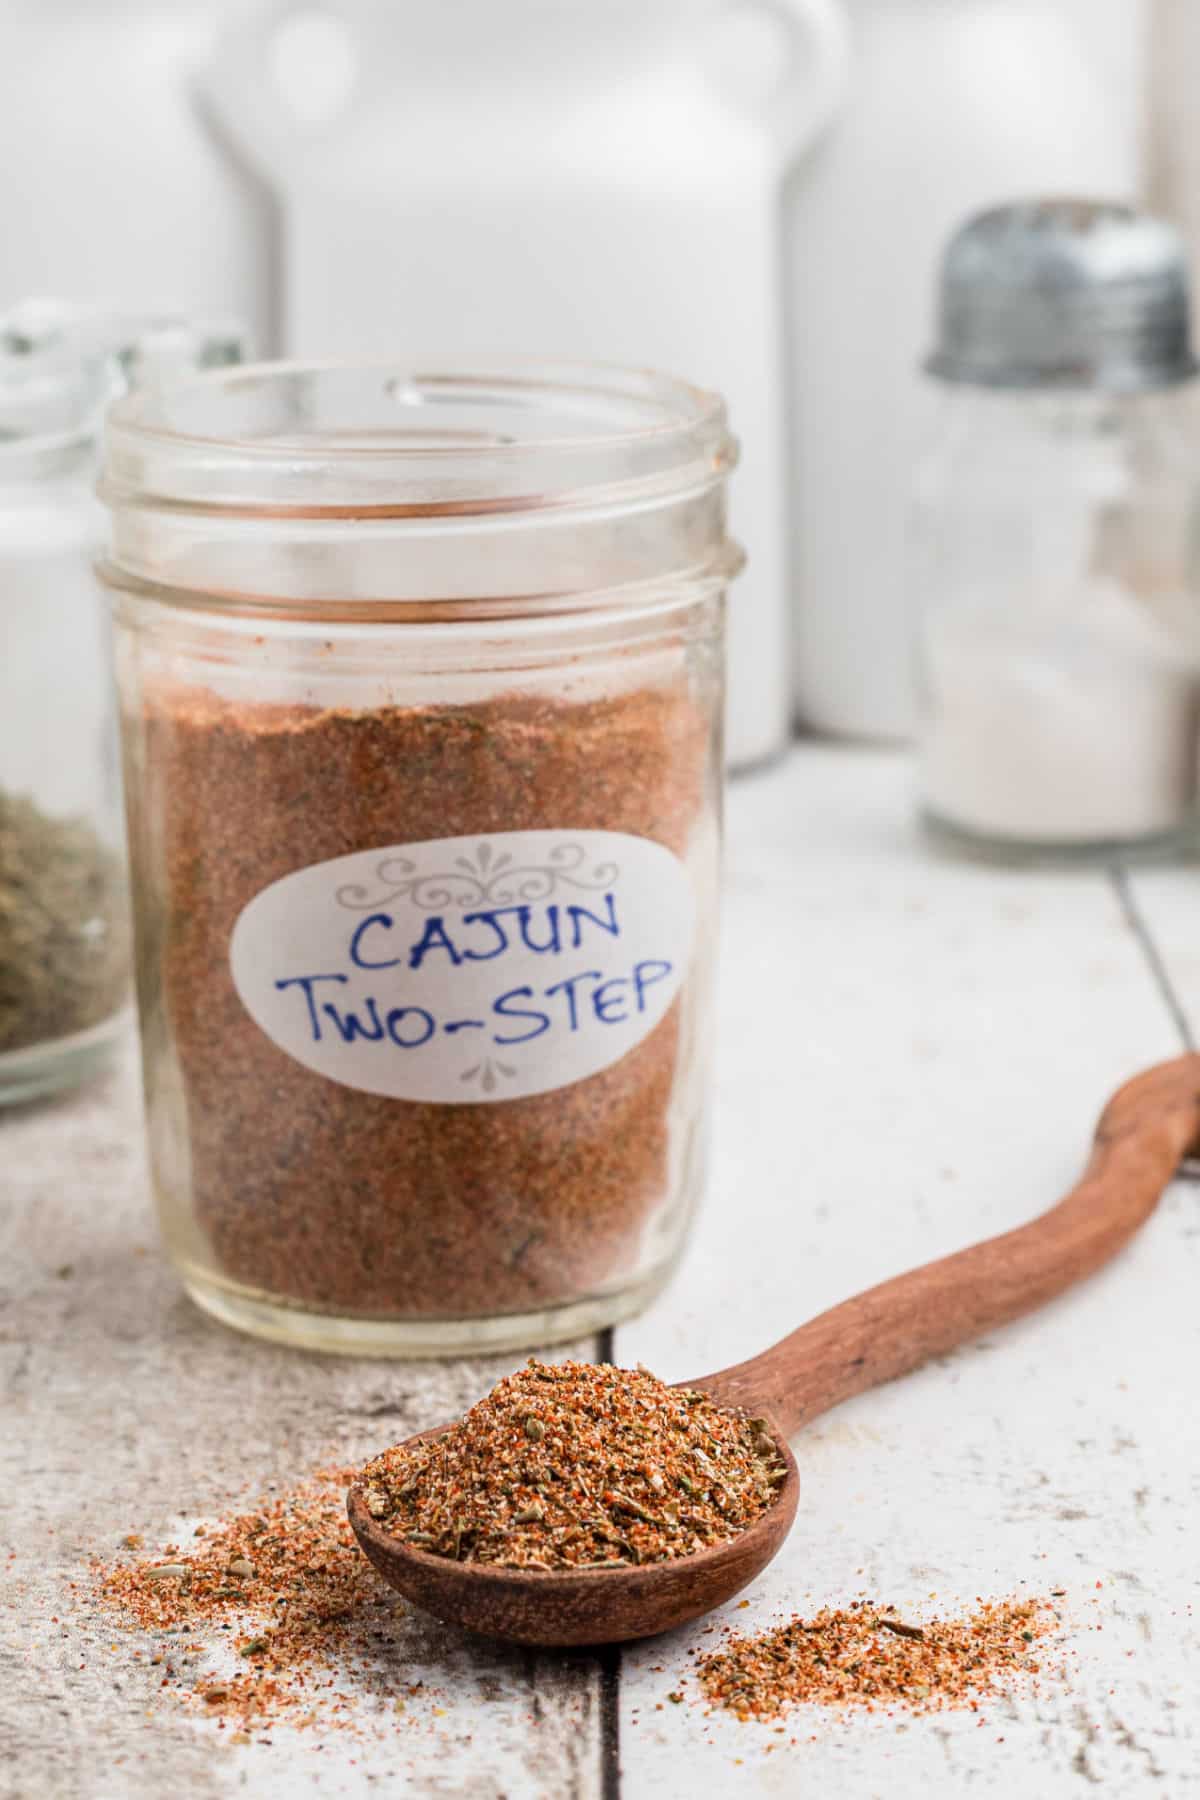 A jar of Cajun two step seasoning with a spoon in front.